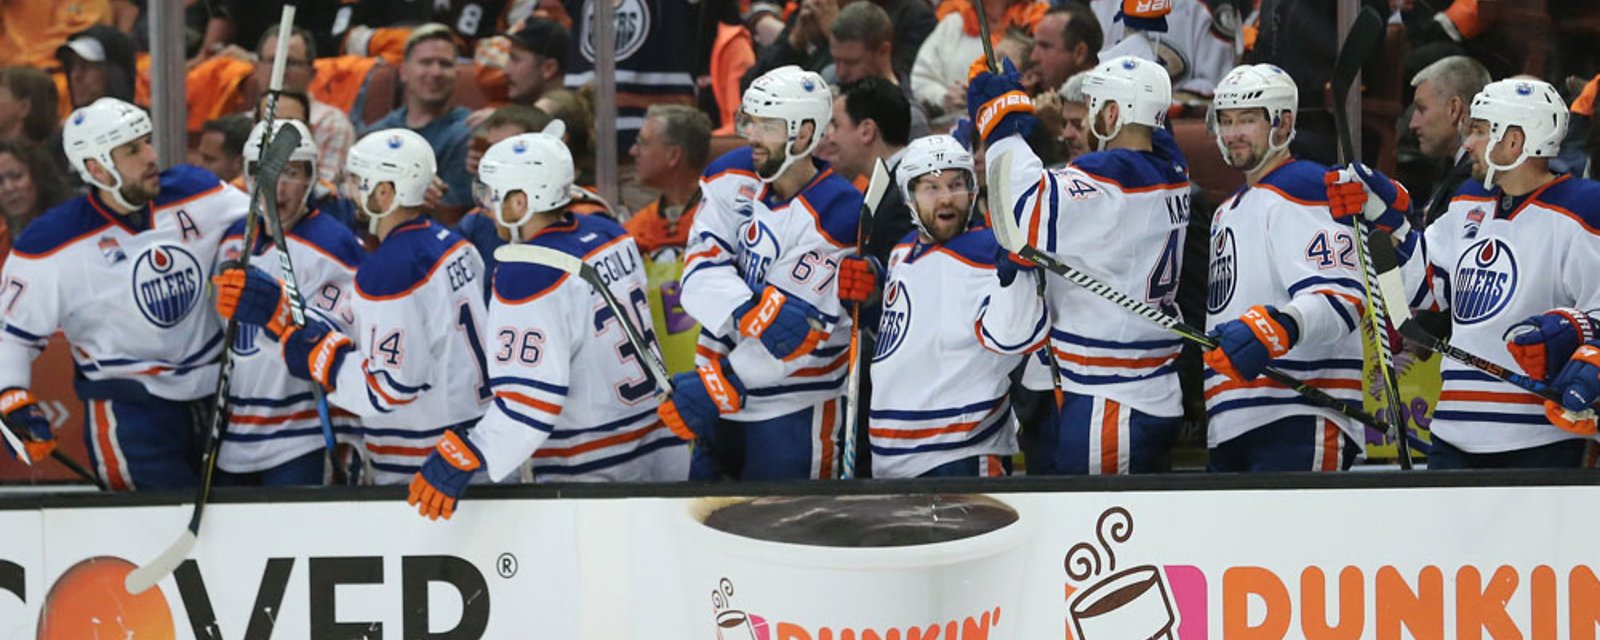 Report: Young forward makes a very bold comment about the Edmonton Oilers!